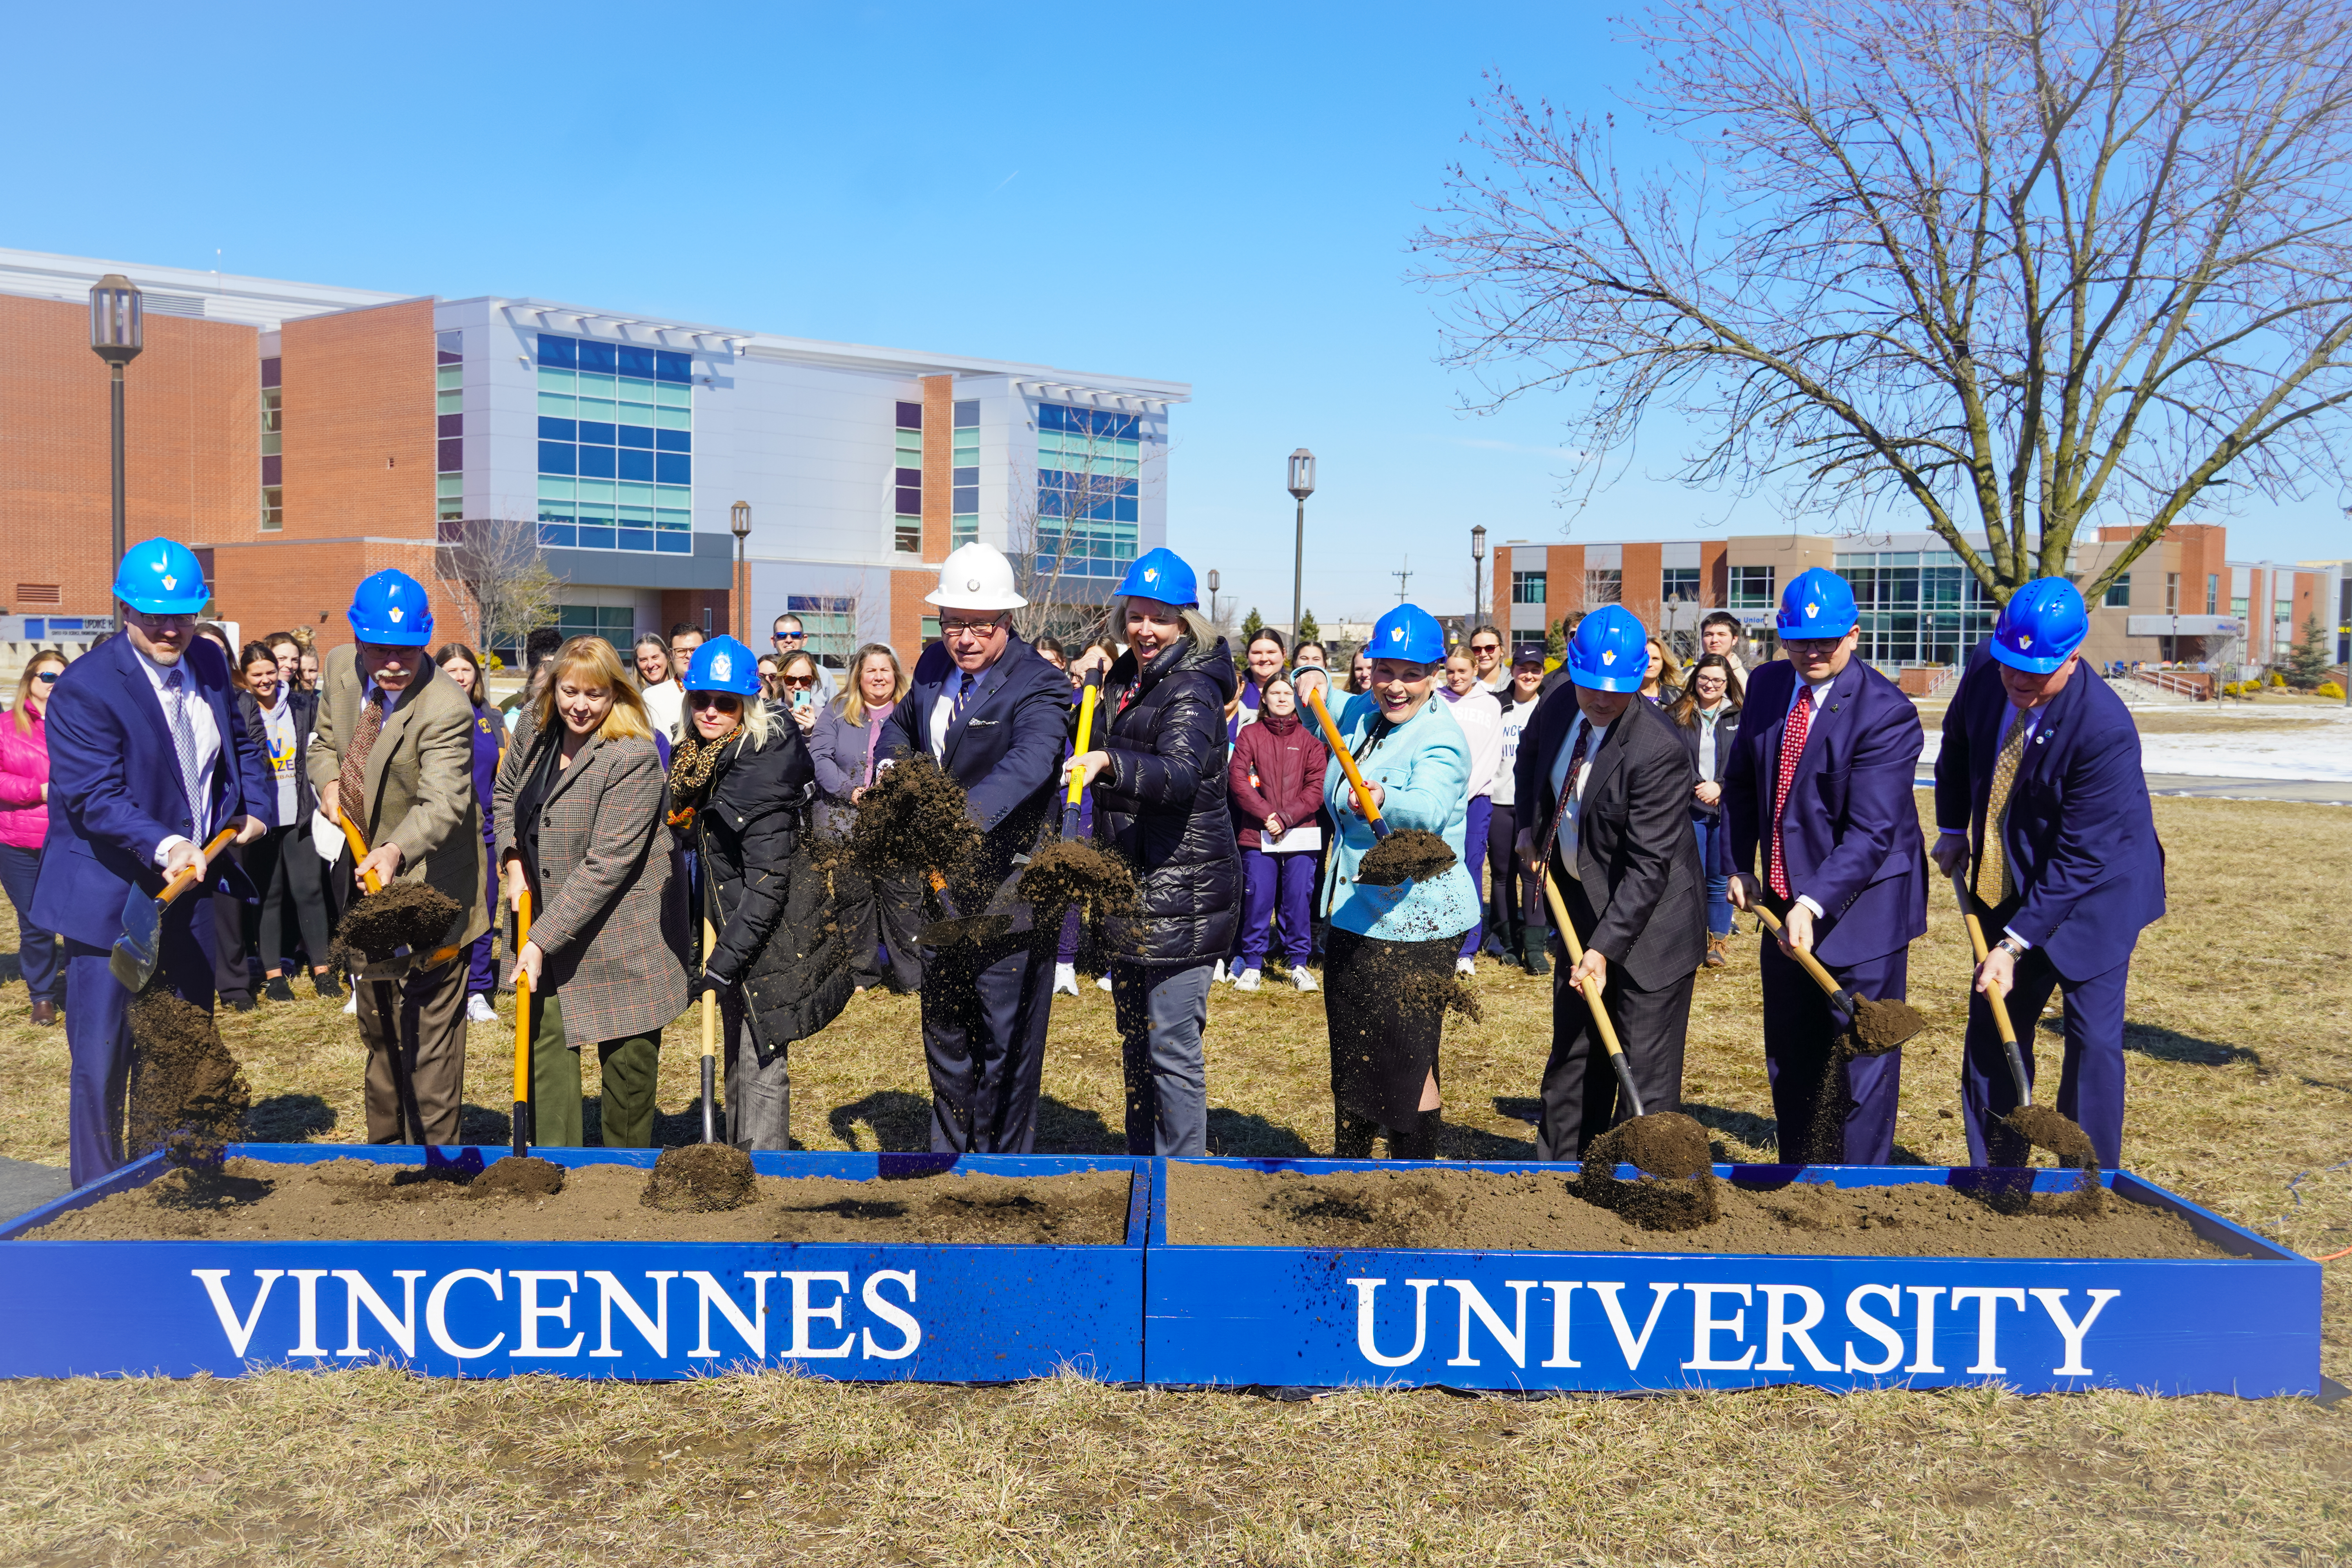 Wearing hard hats and holding shovels, group of VU leaders and community leaders lifts there shovels with dirt into the air.